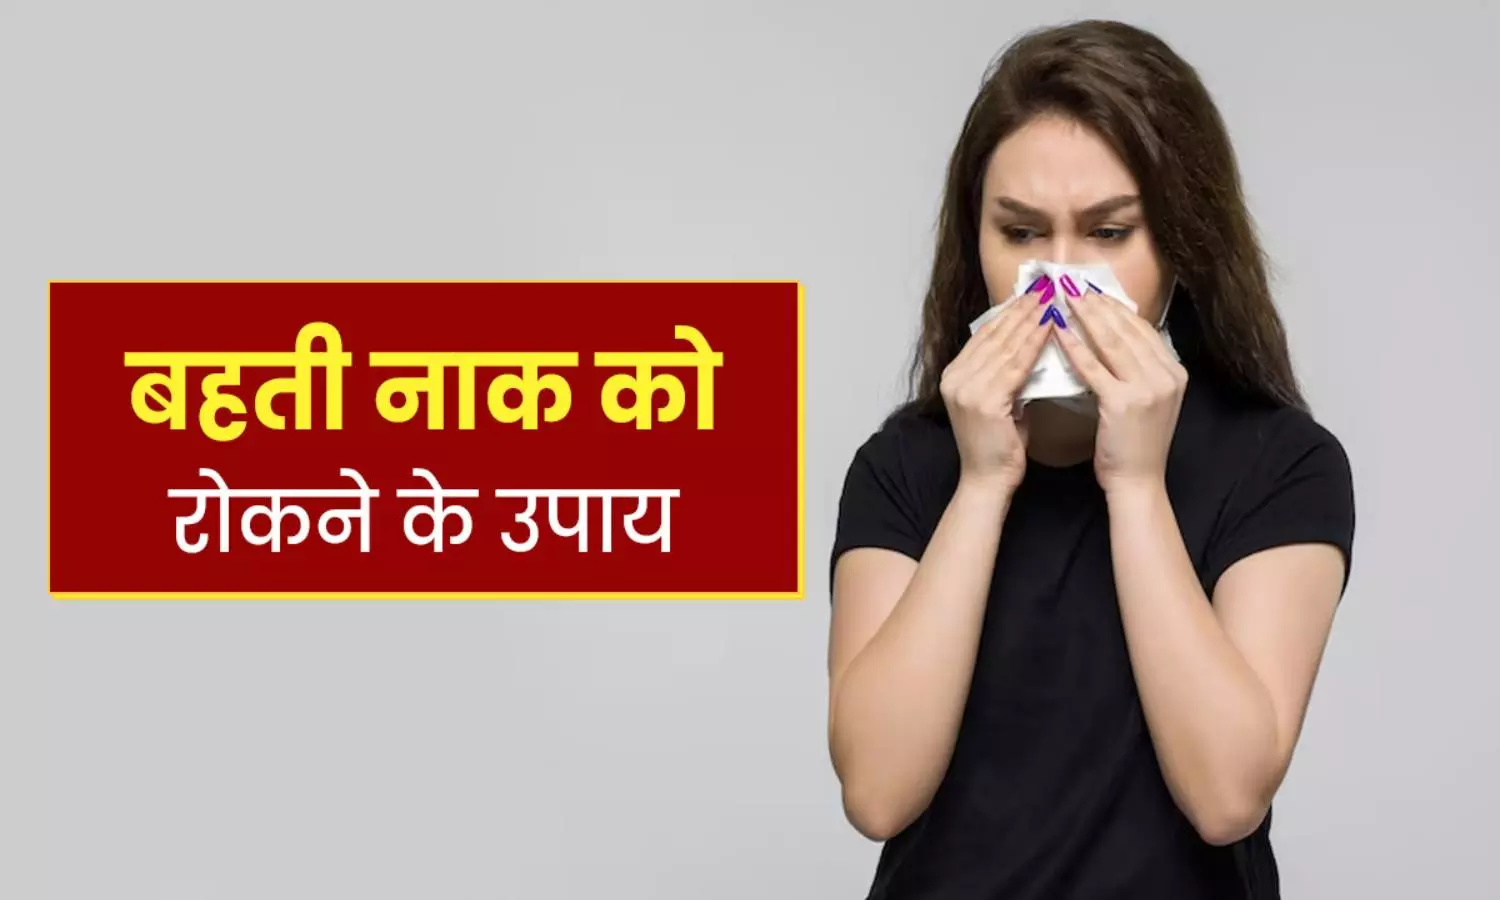 Runny Nose Home Remedies